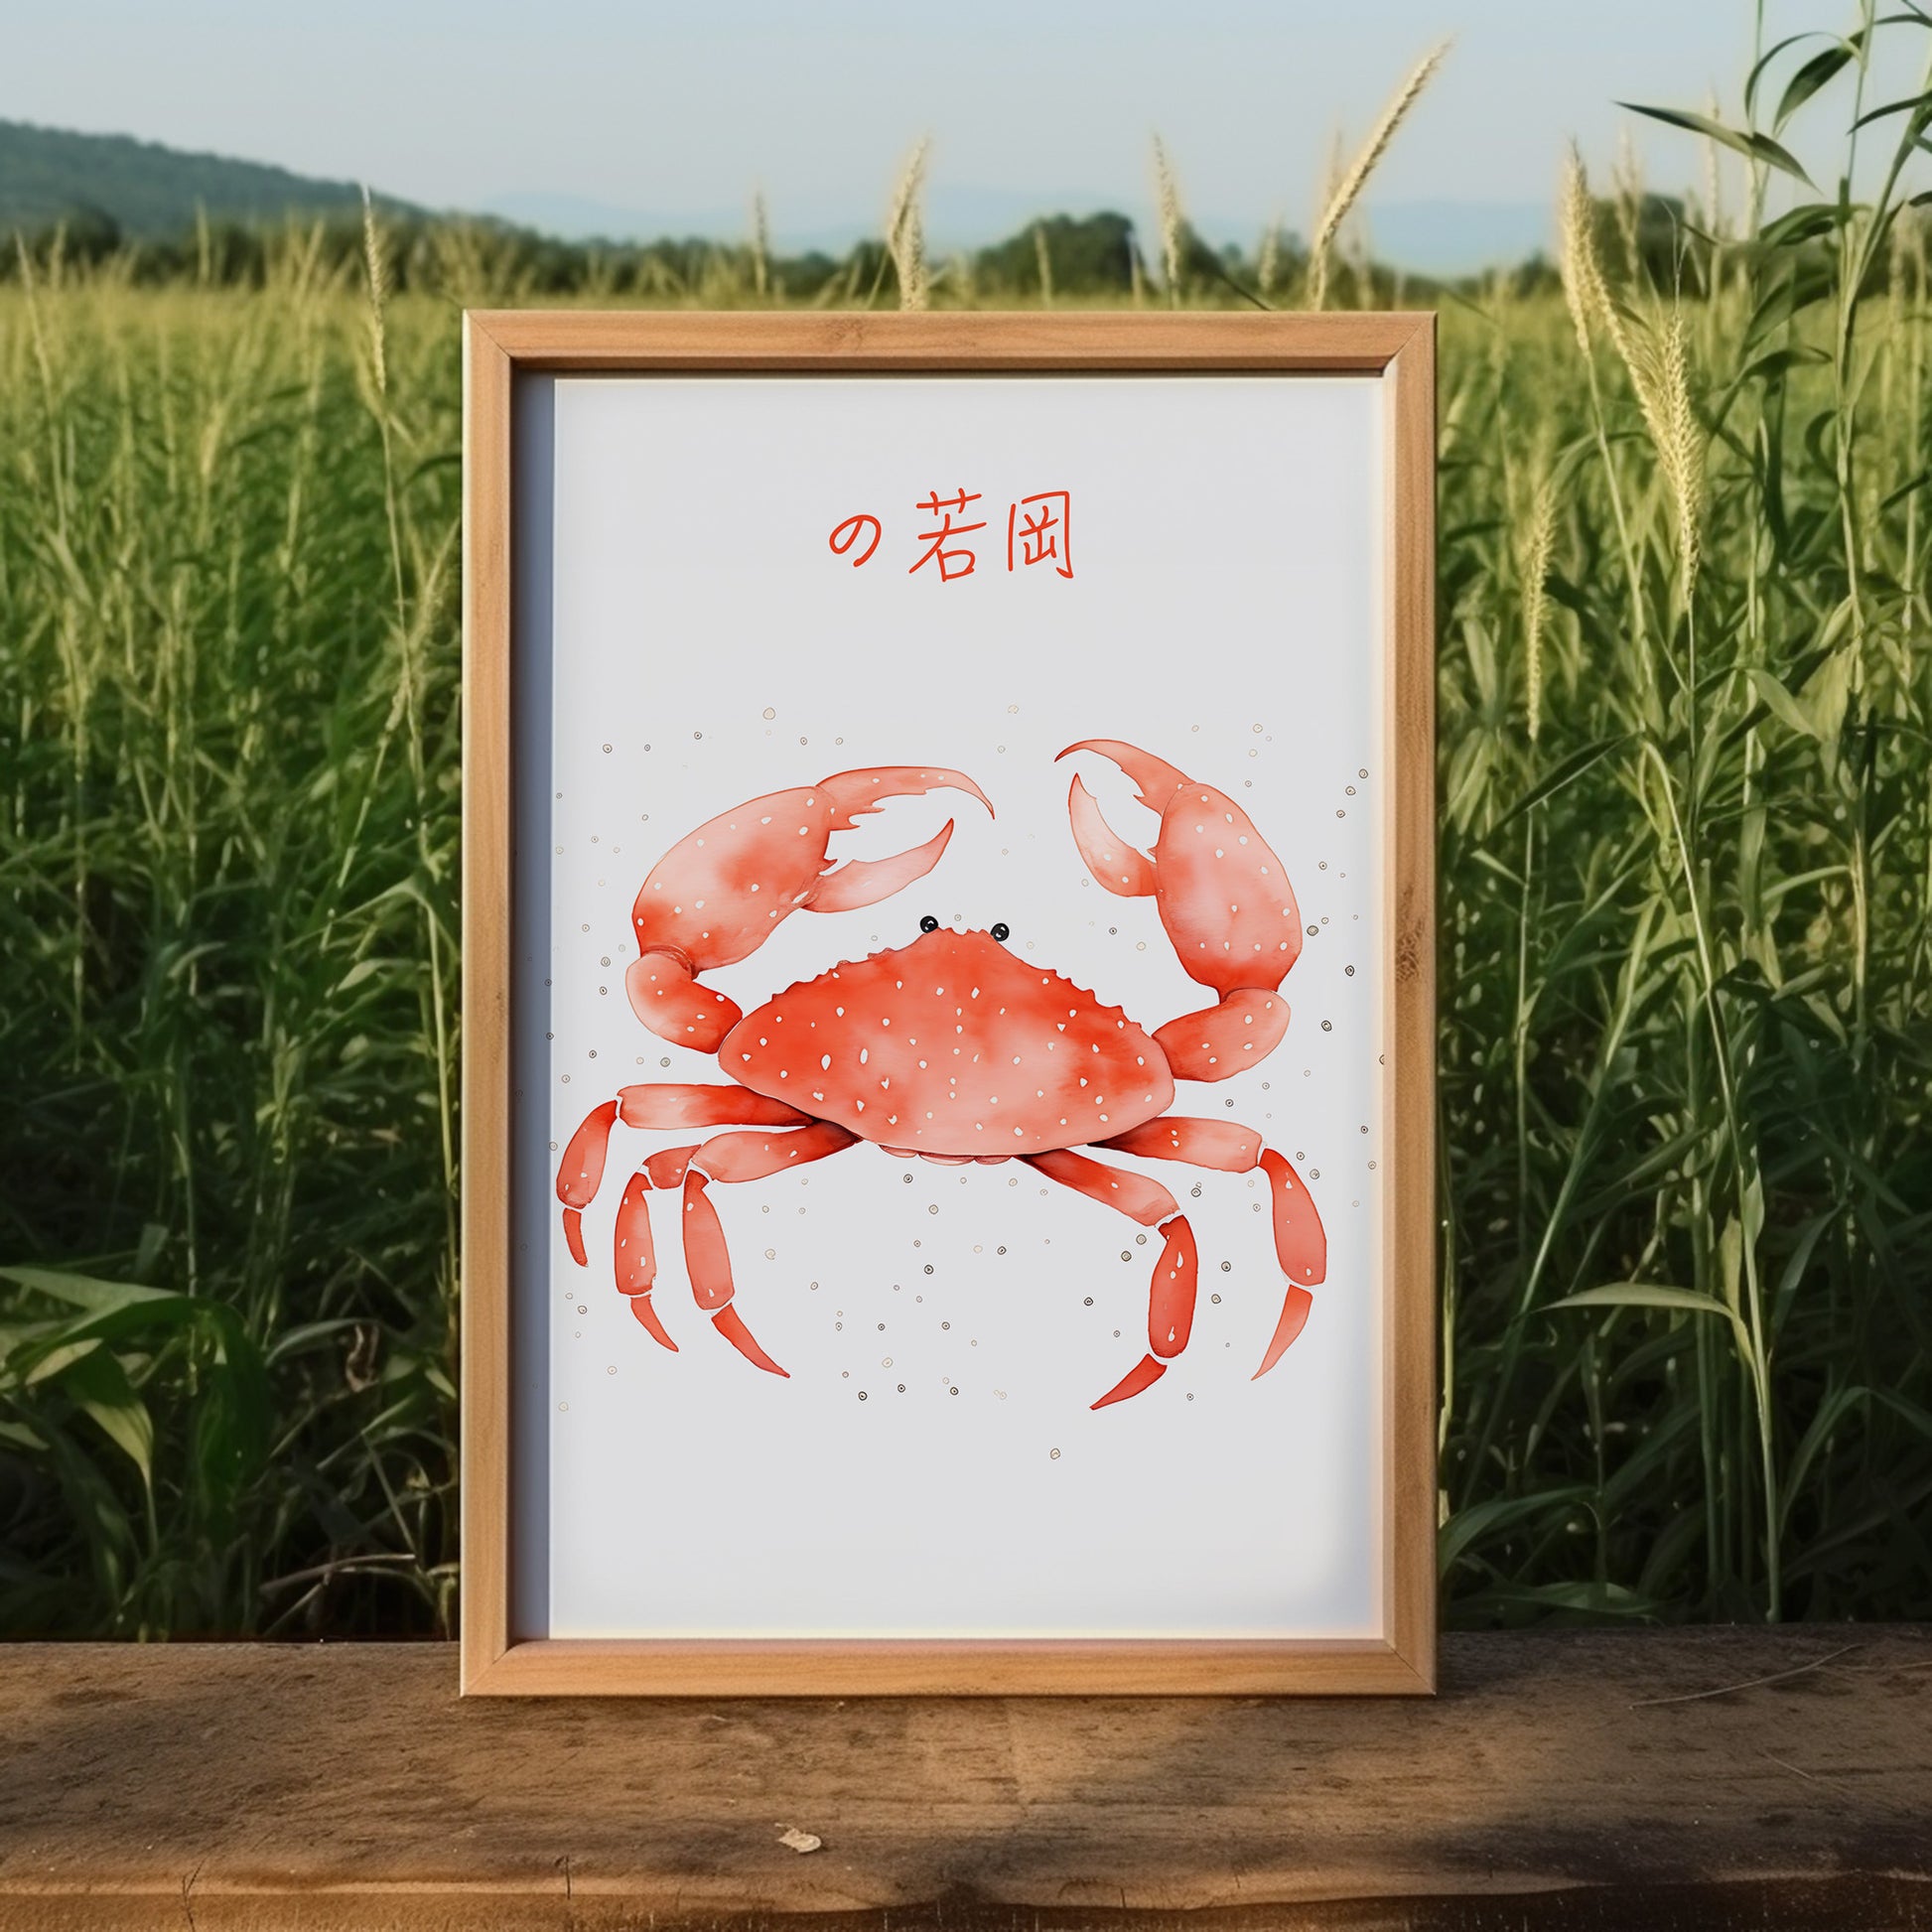 A framed illustration of a red crab with Japanese text against a grassy background.